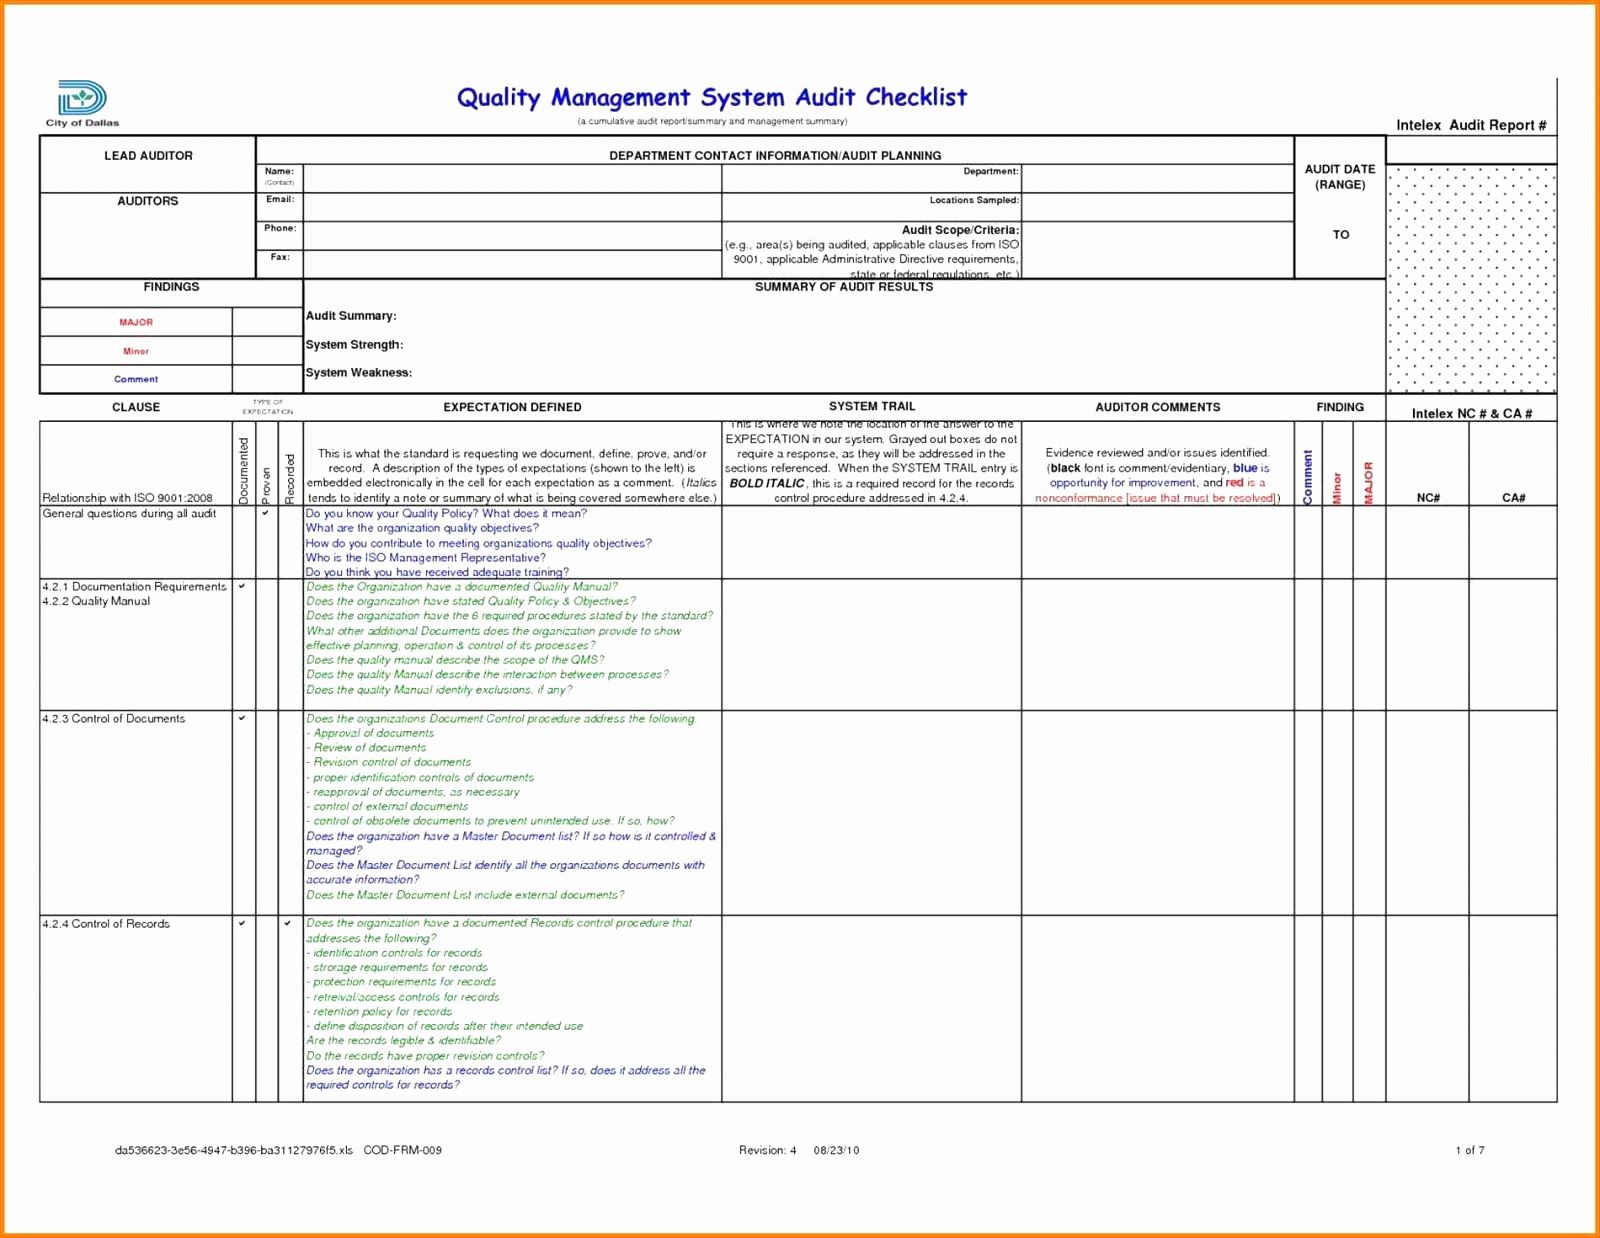 iso-27001-audit-checklist-template-ascseaw